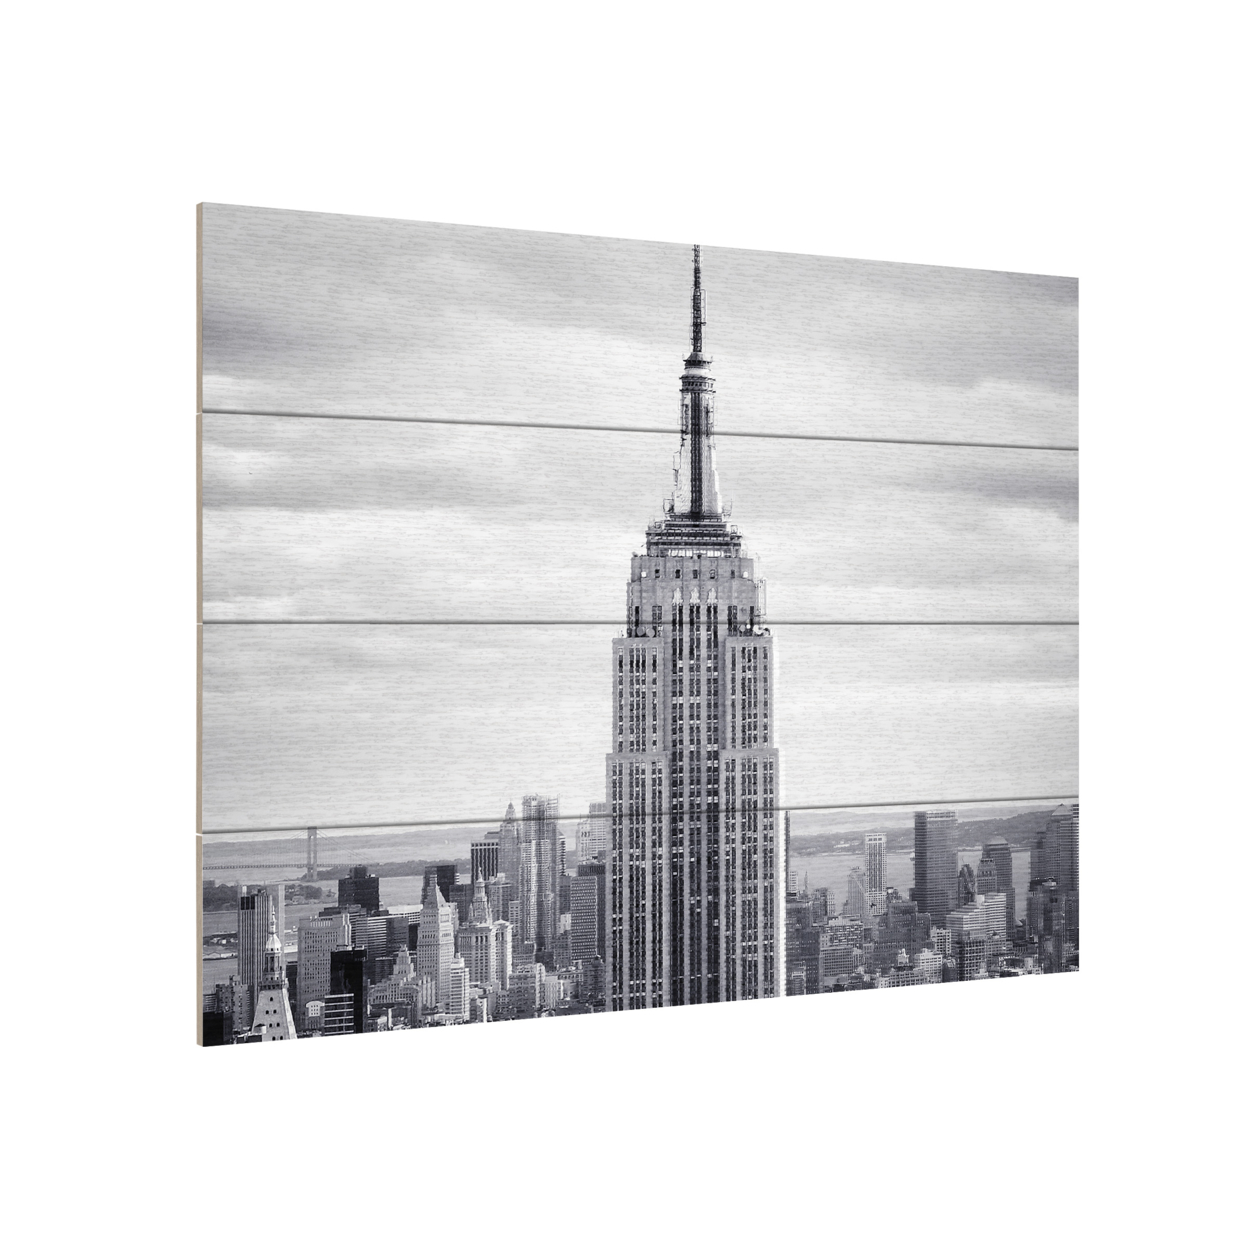 Wall Art 12 X 16 Inches Titled Empire Ready To Hang Printed On Wooden Planks